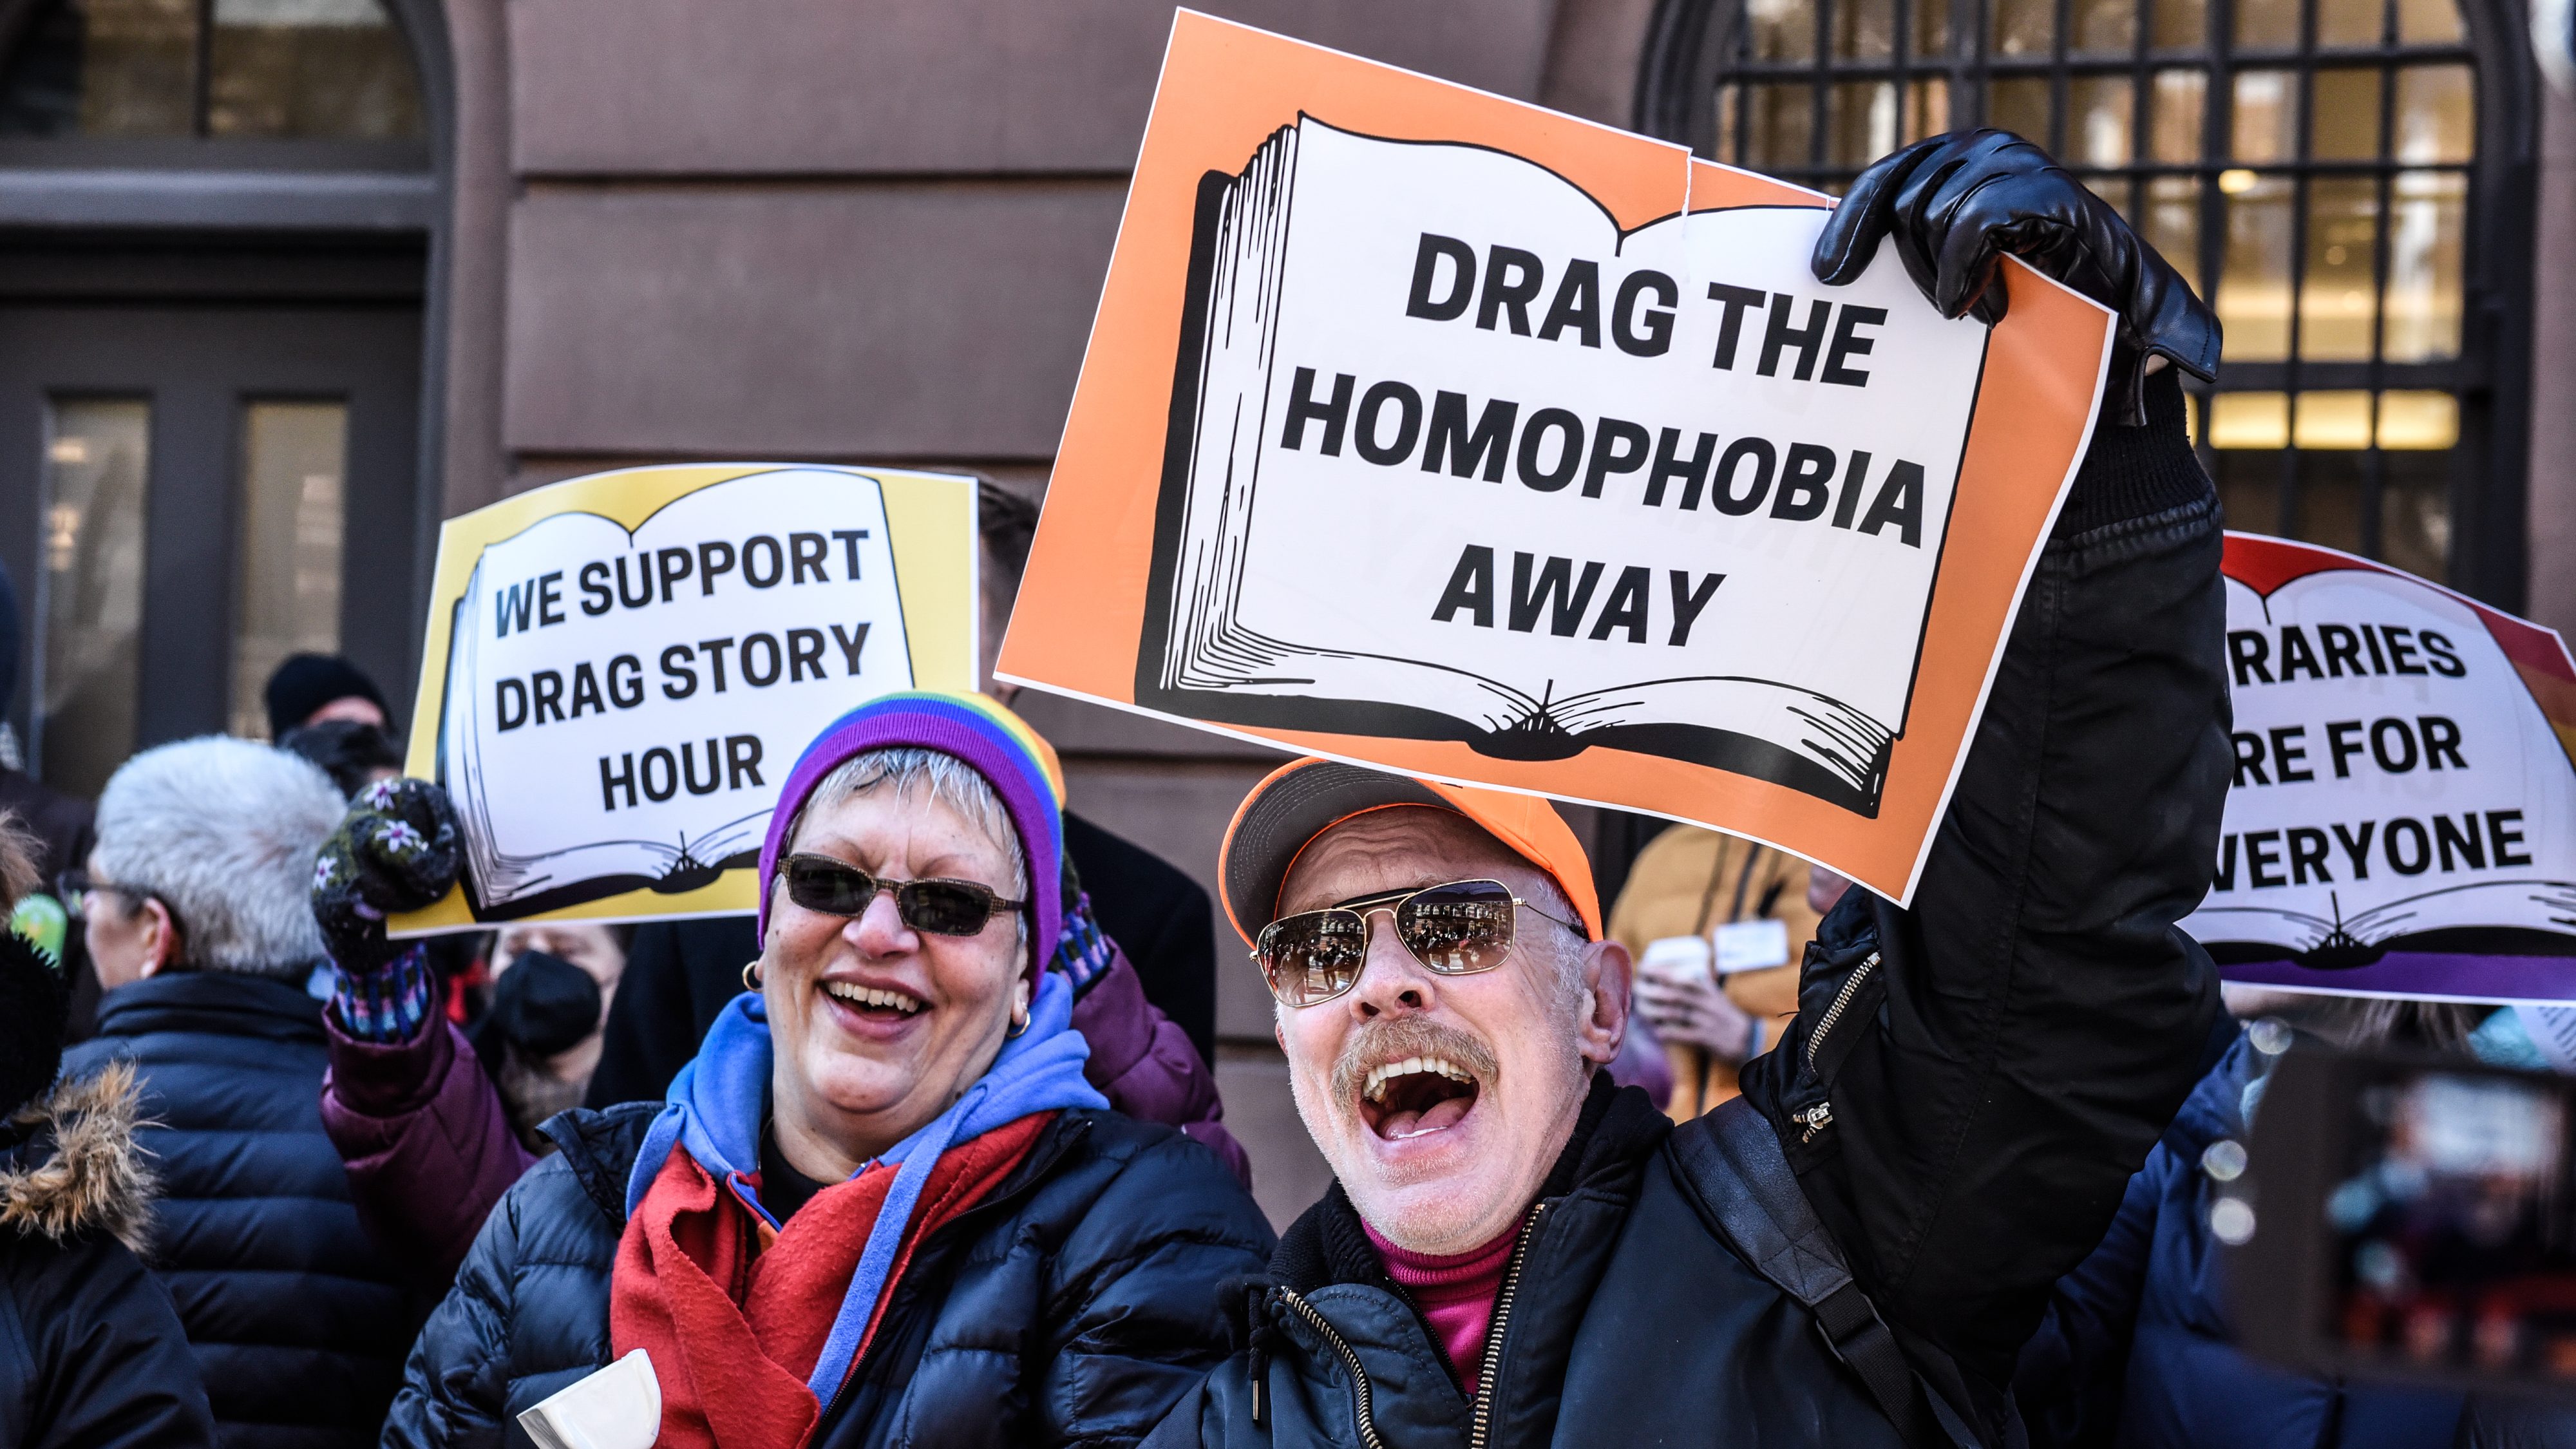 Protesters supporting Drag Queen story hour hold signs outside of The Center, a support space for LGBTQ+ people on March 19, 2023 in New York City.